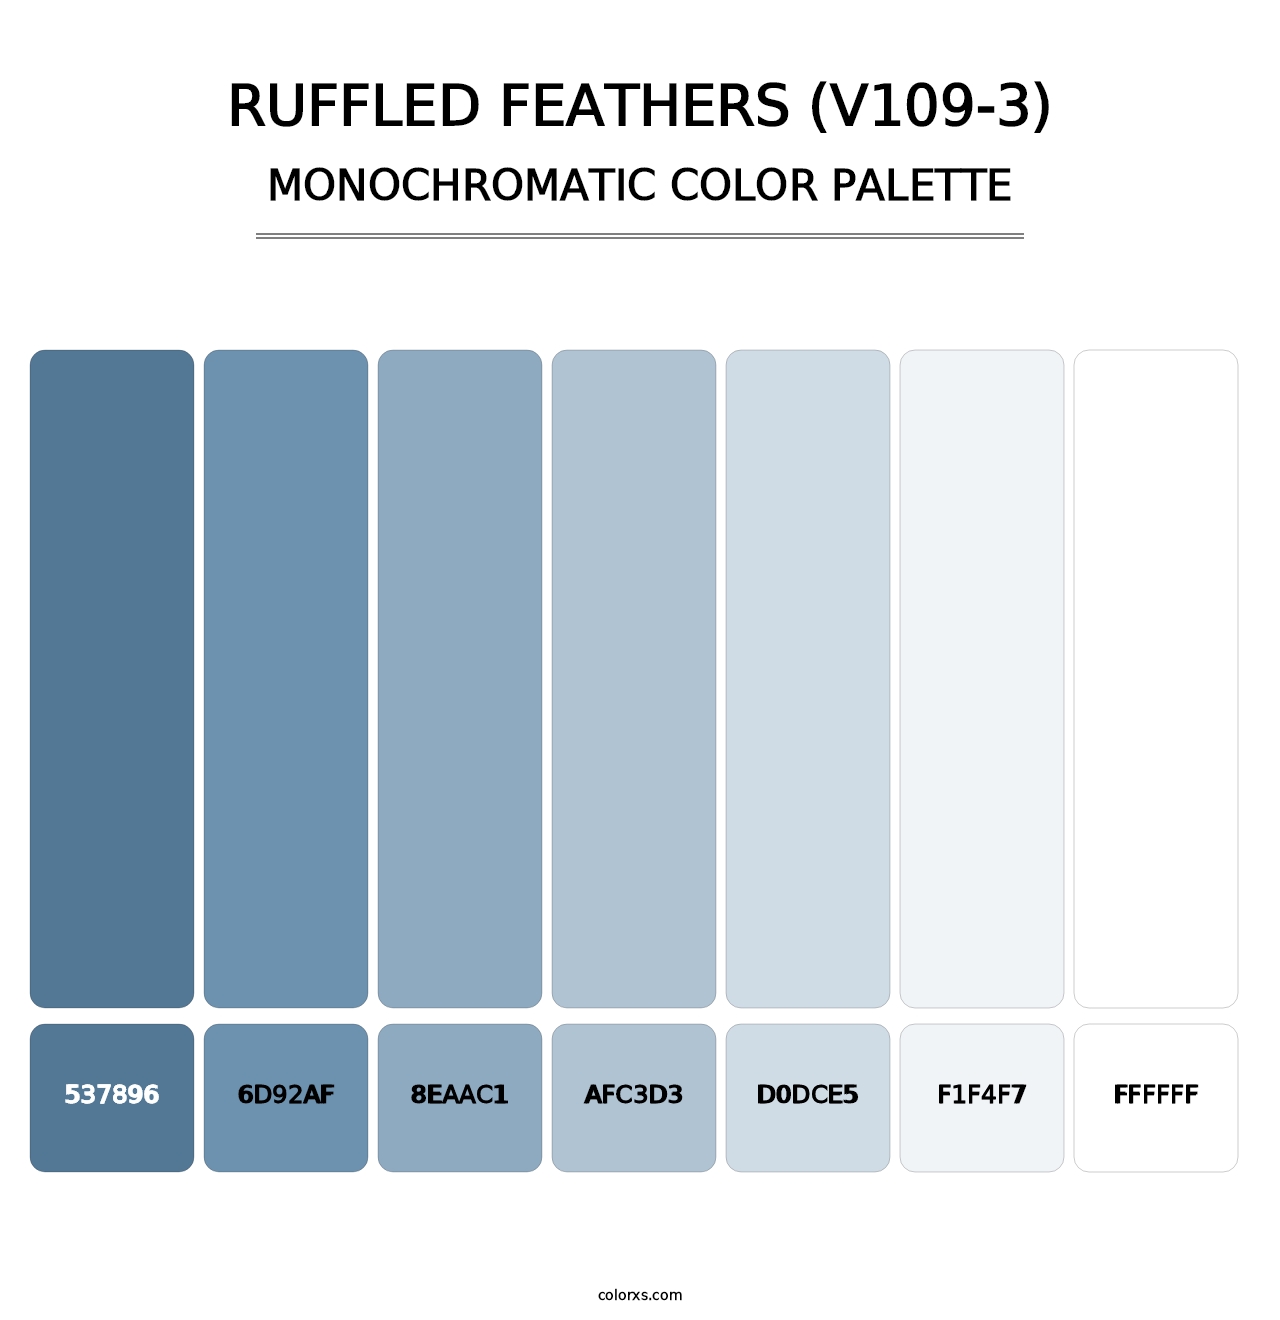 Ruffled Feathers (V109-3) - Monochromatic Color Palette